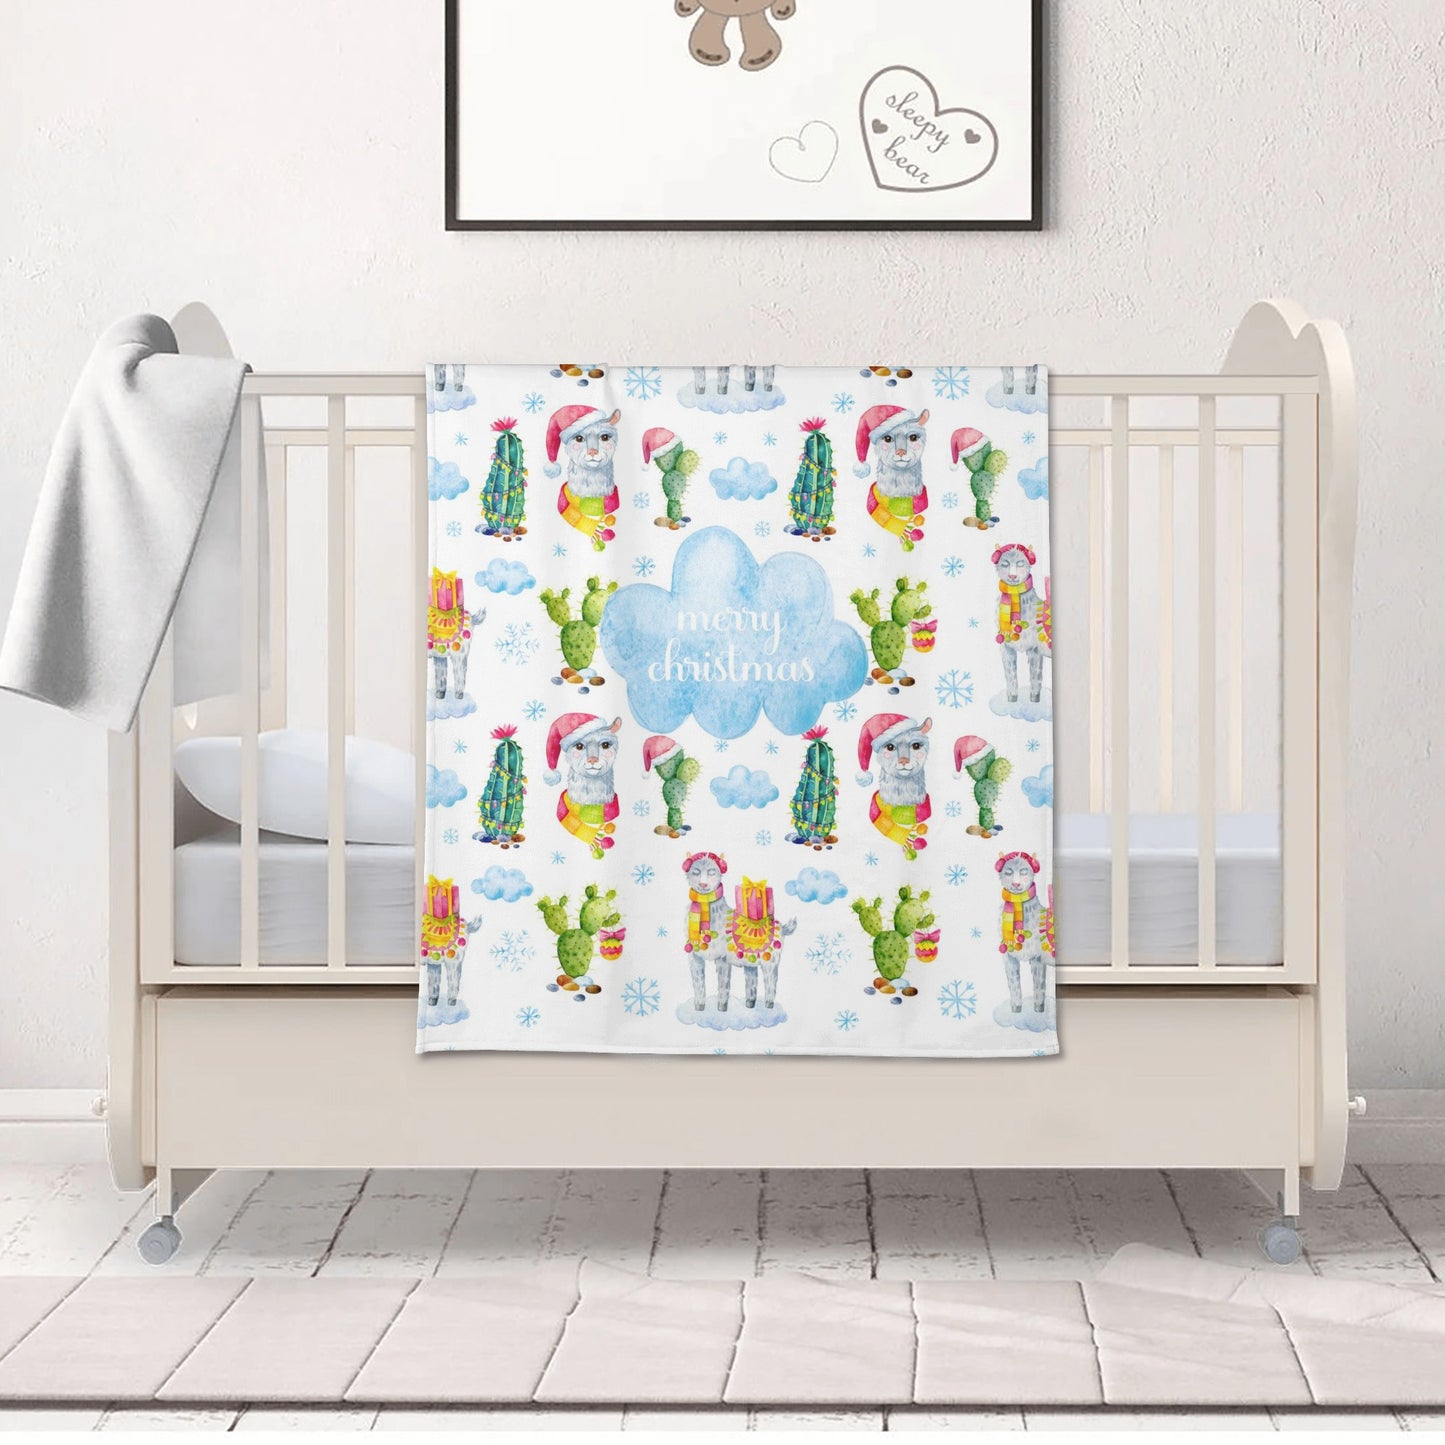 A Christmas Lama Soft Flannel Breathable Blanket for Babies and Tots